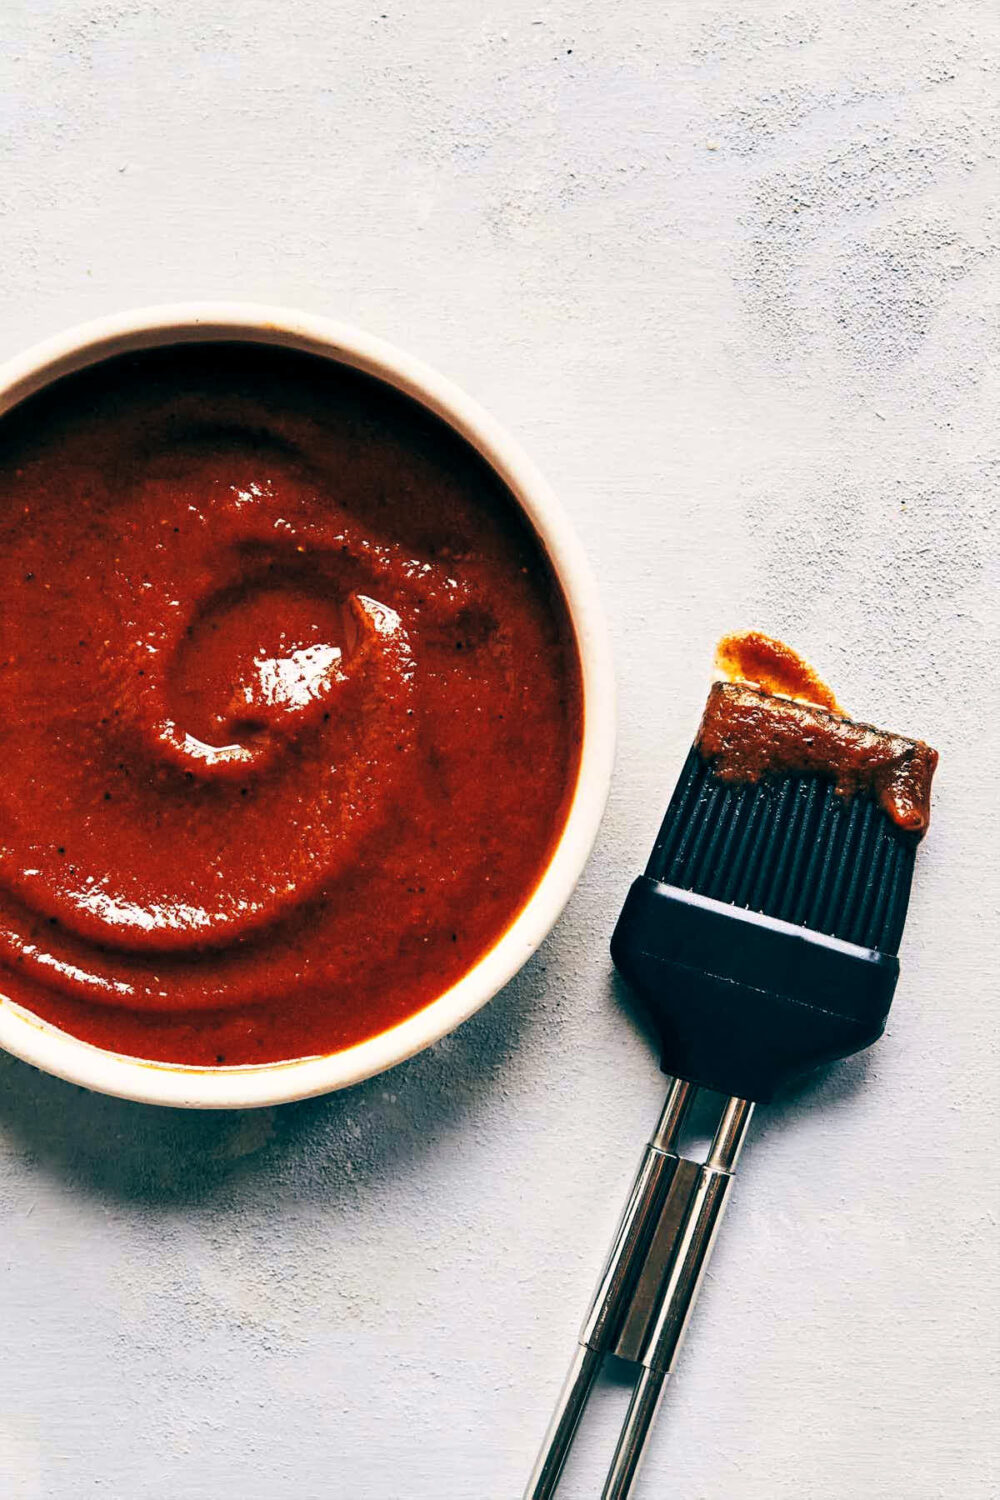 Homemade barbeque sauce on a surface with a brush